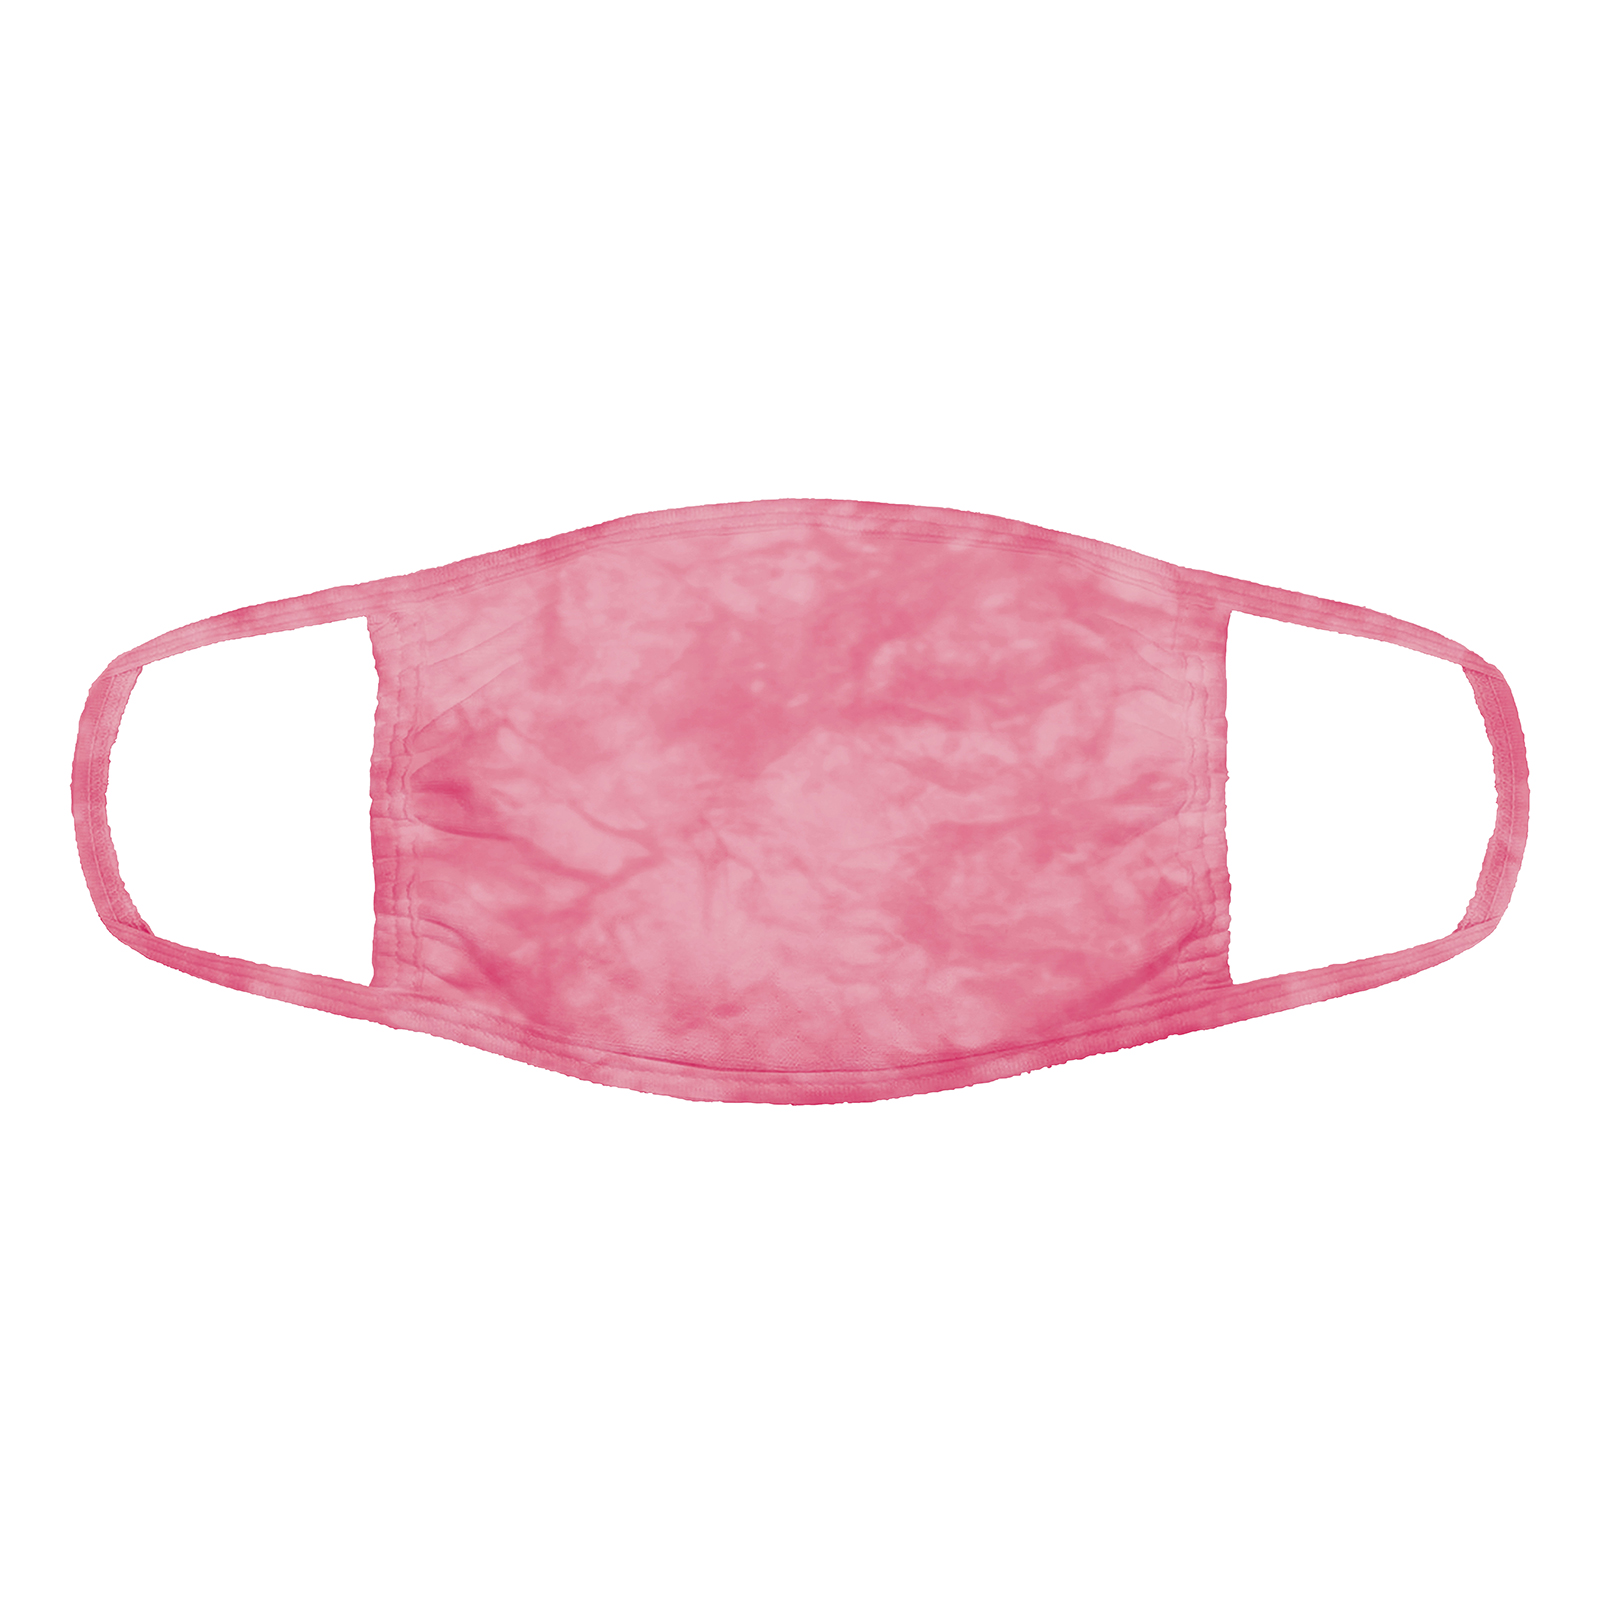 Cotton Candy Pink Face Mask